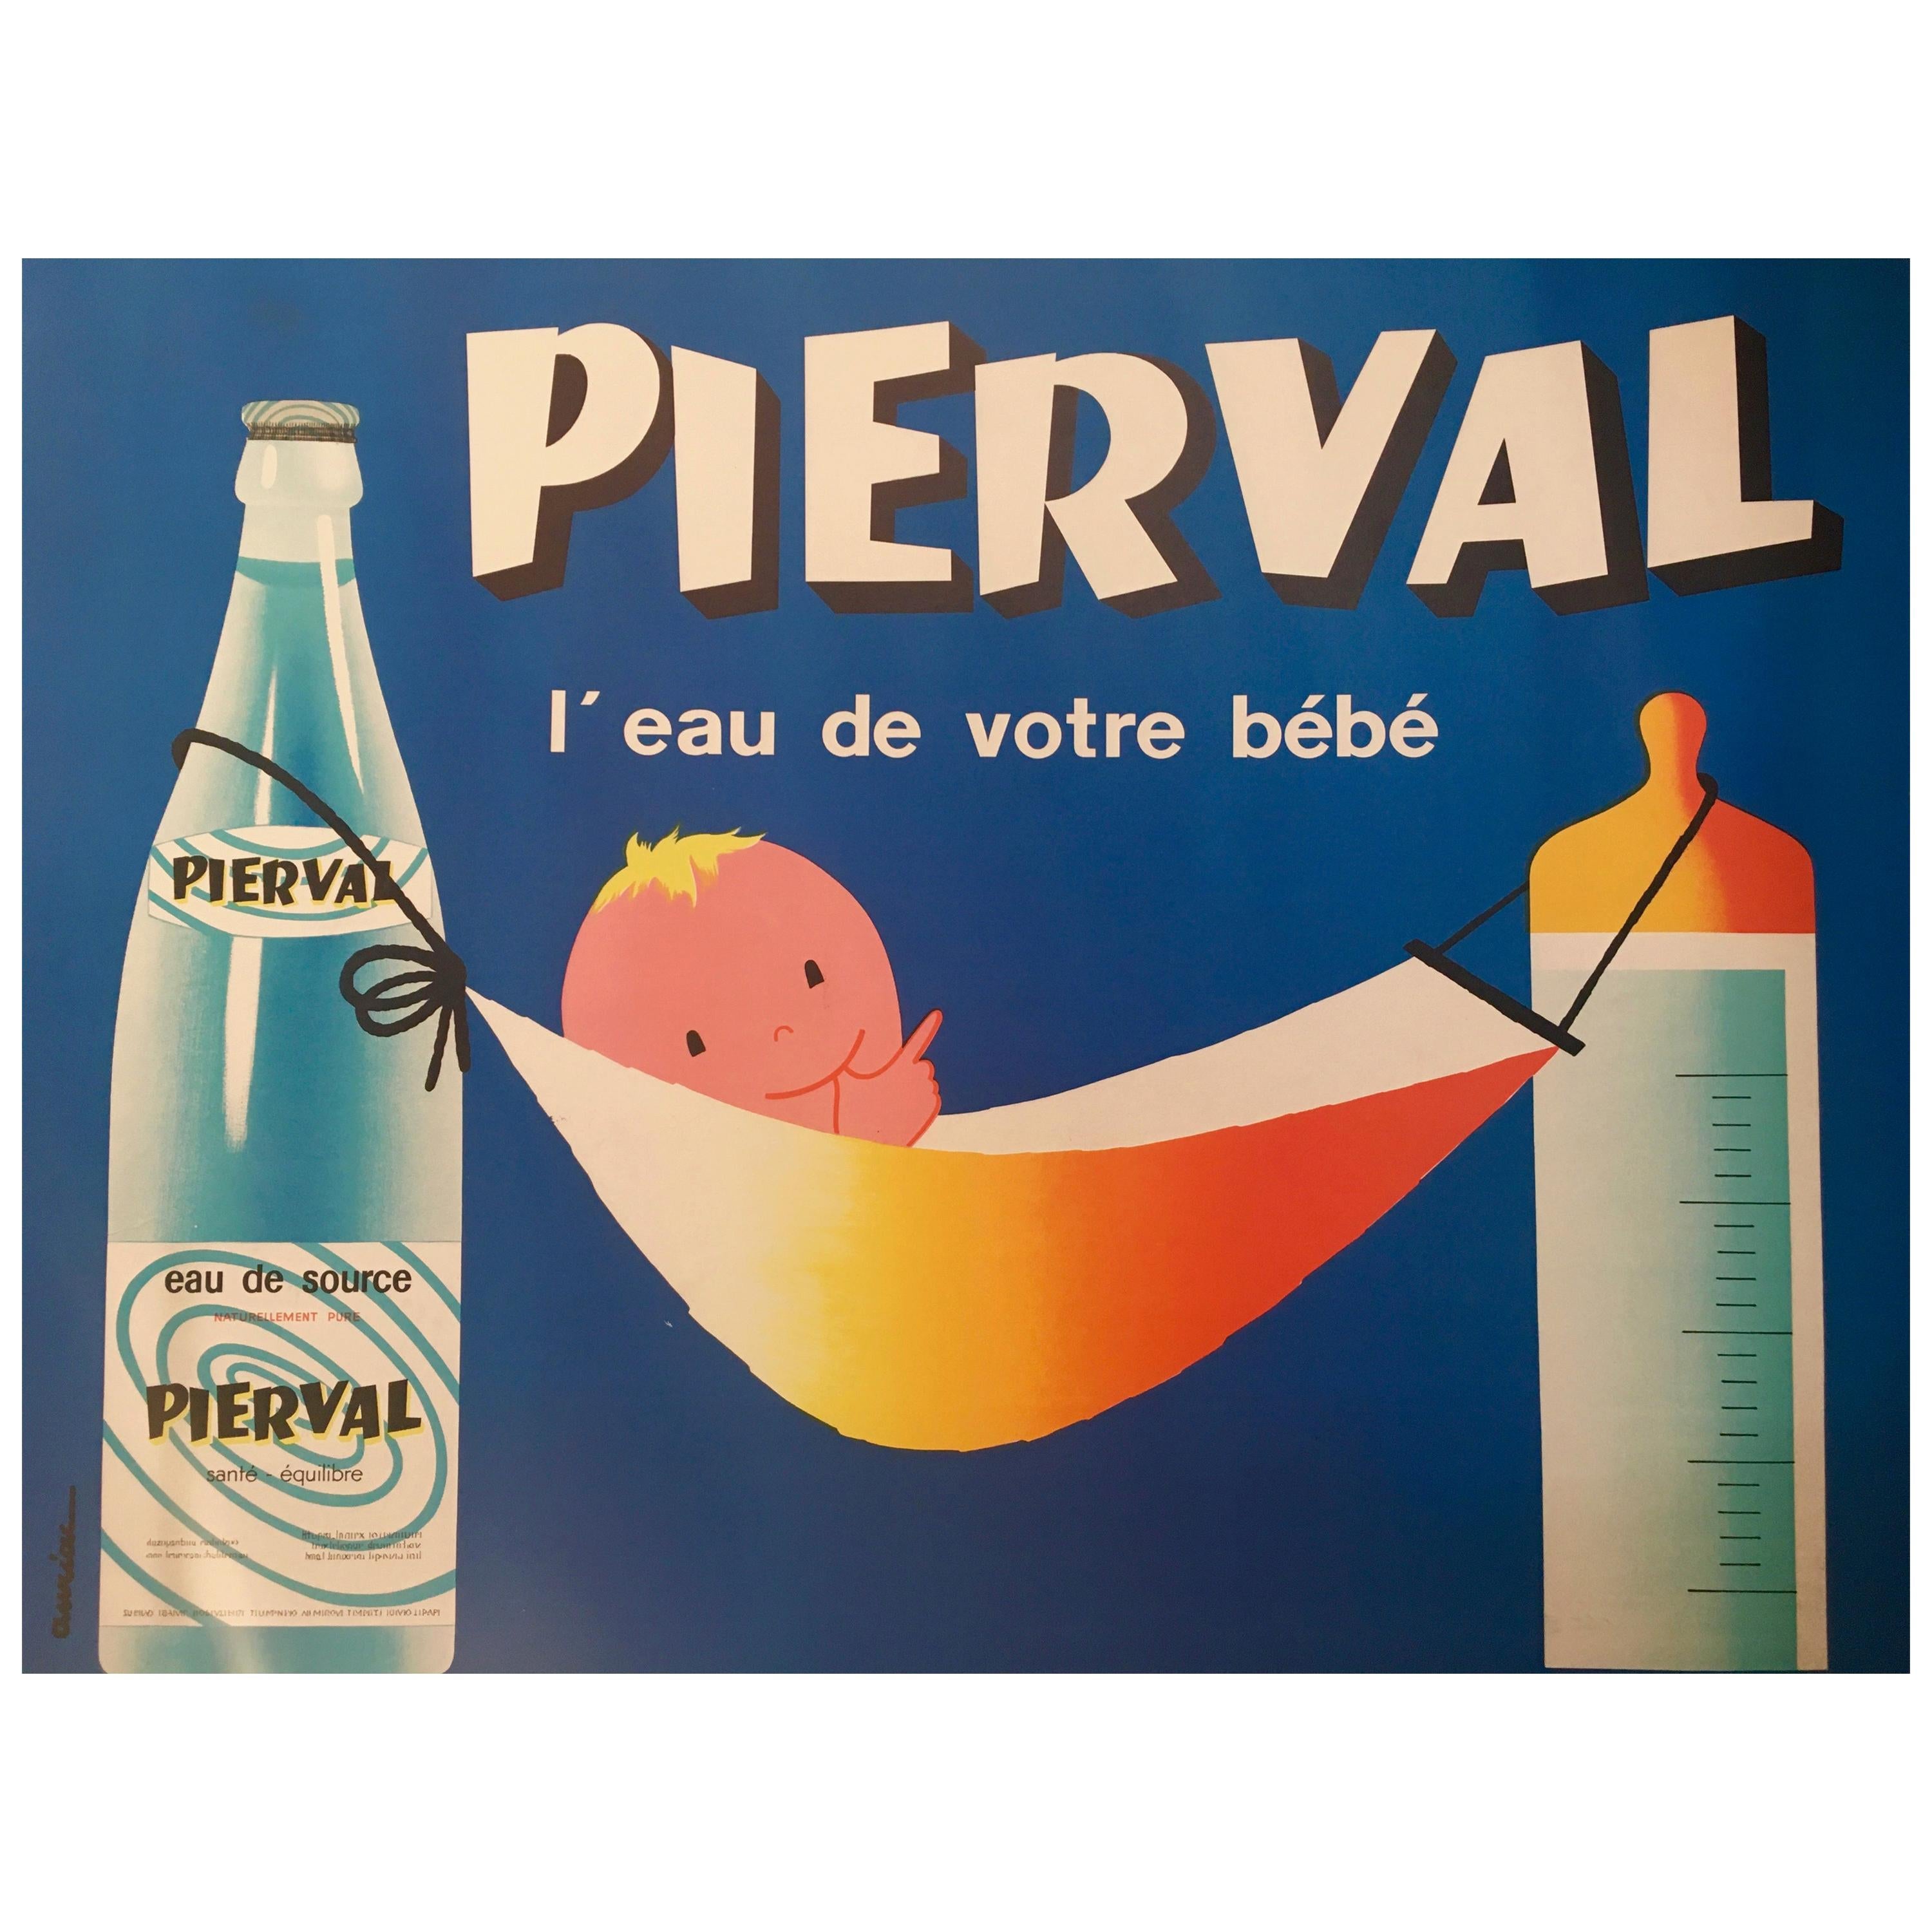 French Mineral Water Original Vintage Advertising Poster, 'Pierval' by J. Auriac